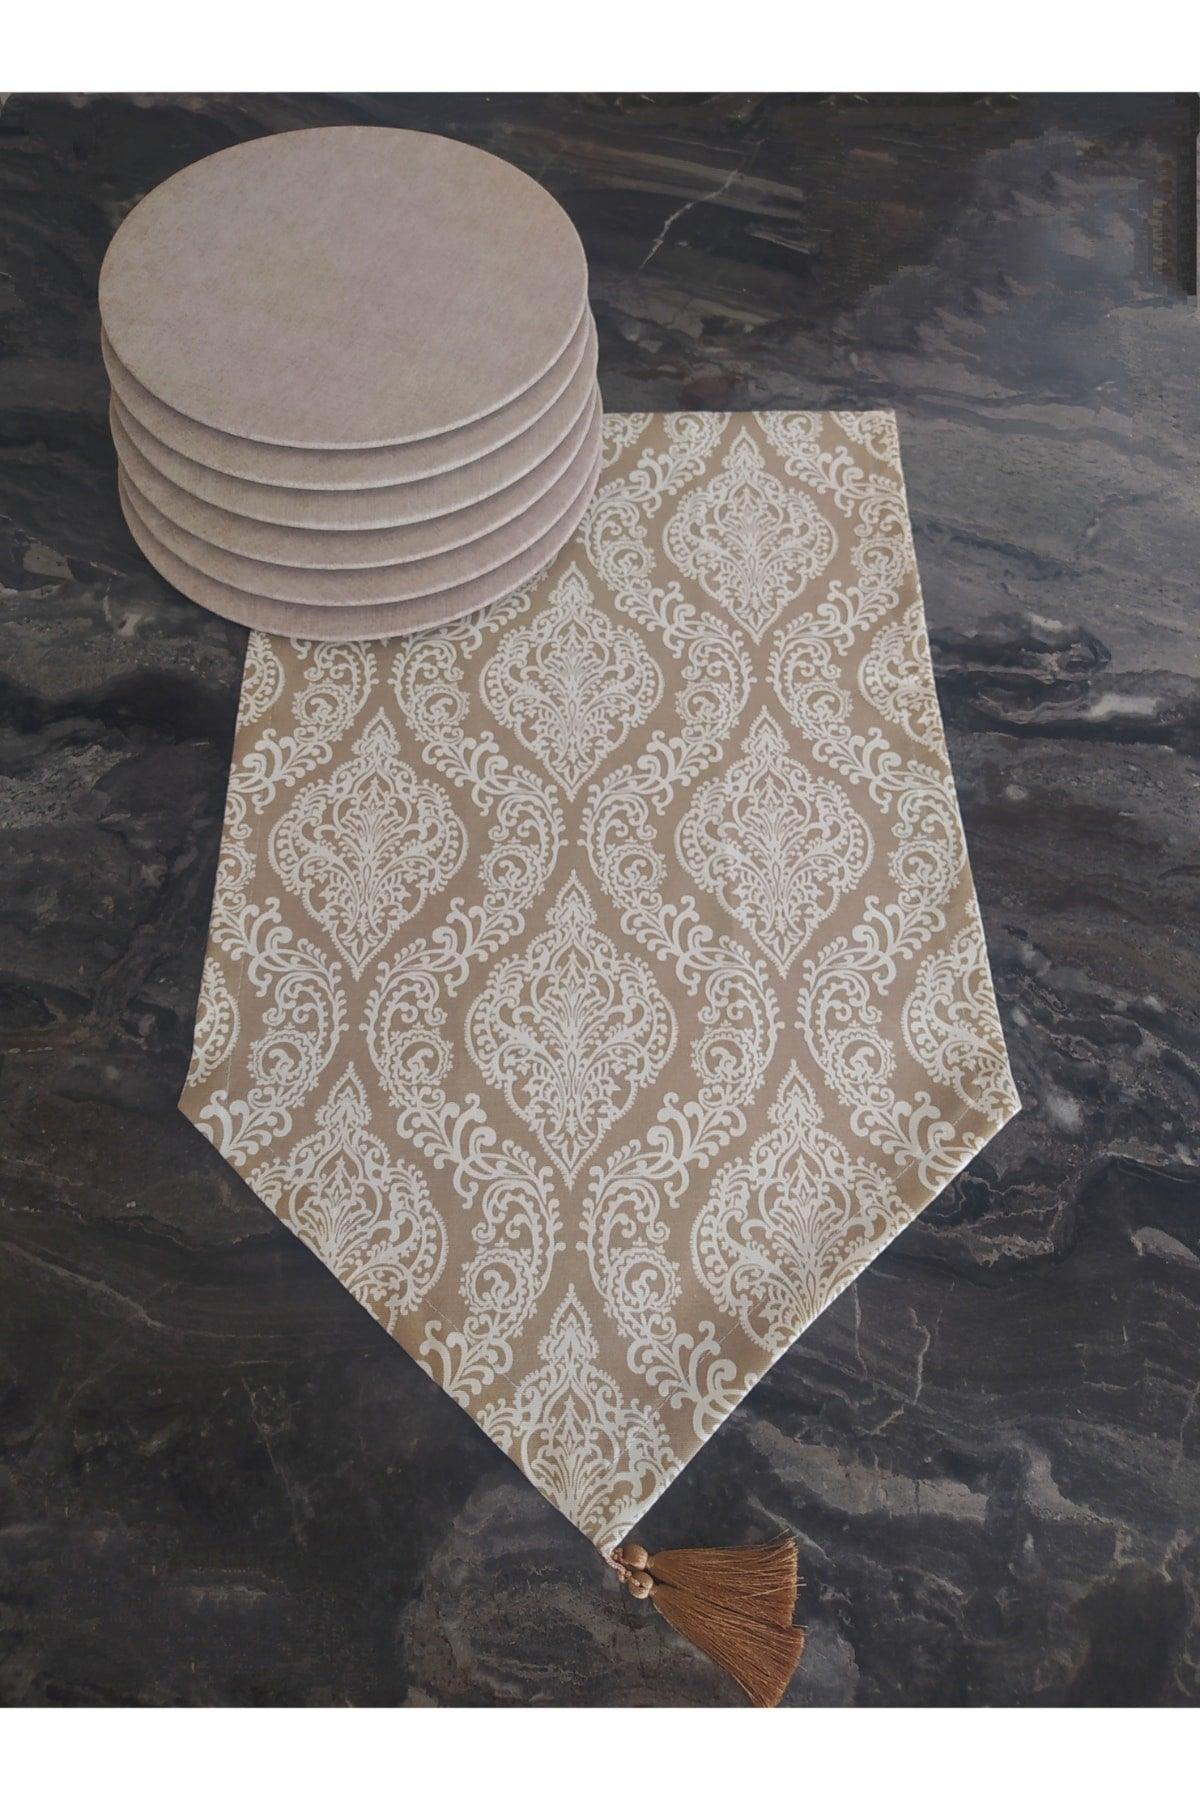 Patterned Runner + 6 Pieces Placemat Cover Set - Swordslife